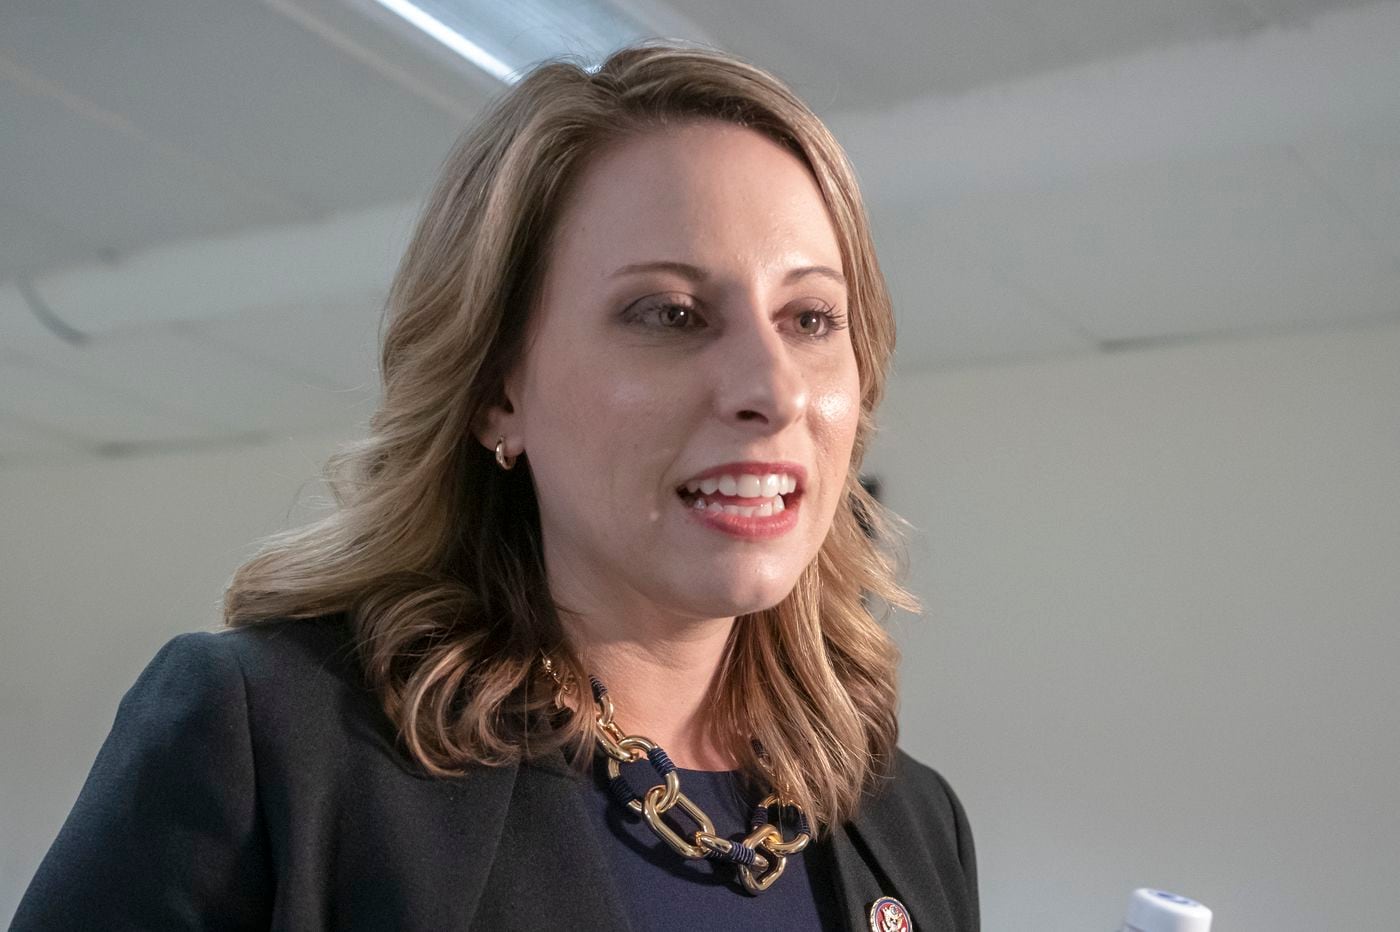 Rep. Katie Hill resigned because she behaved unethically ...